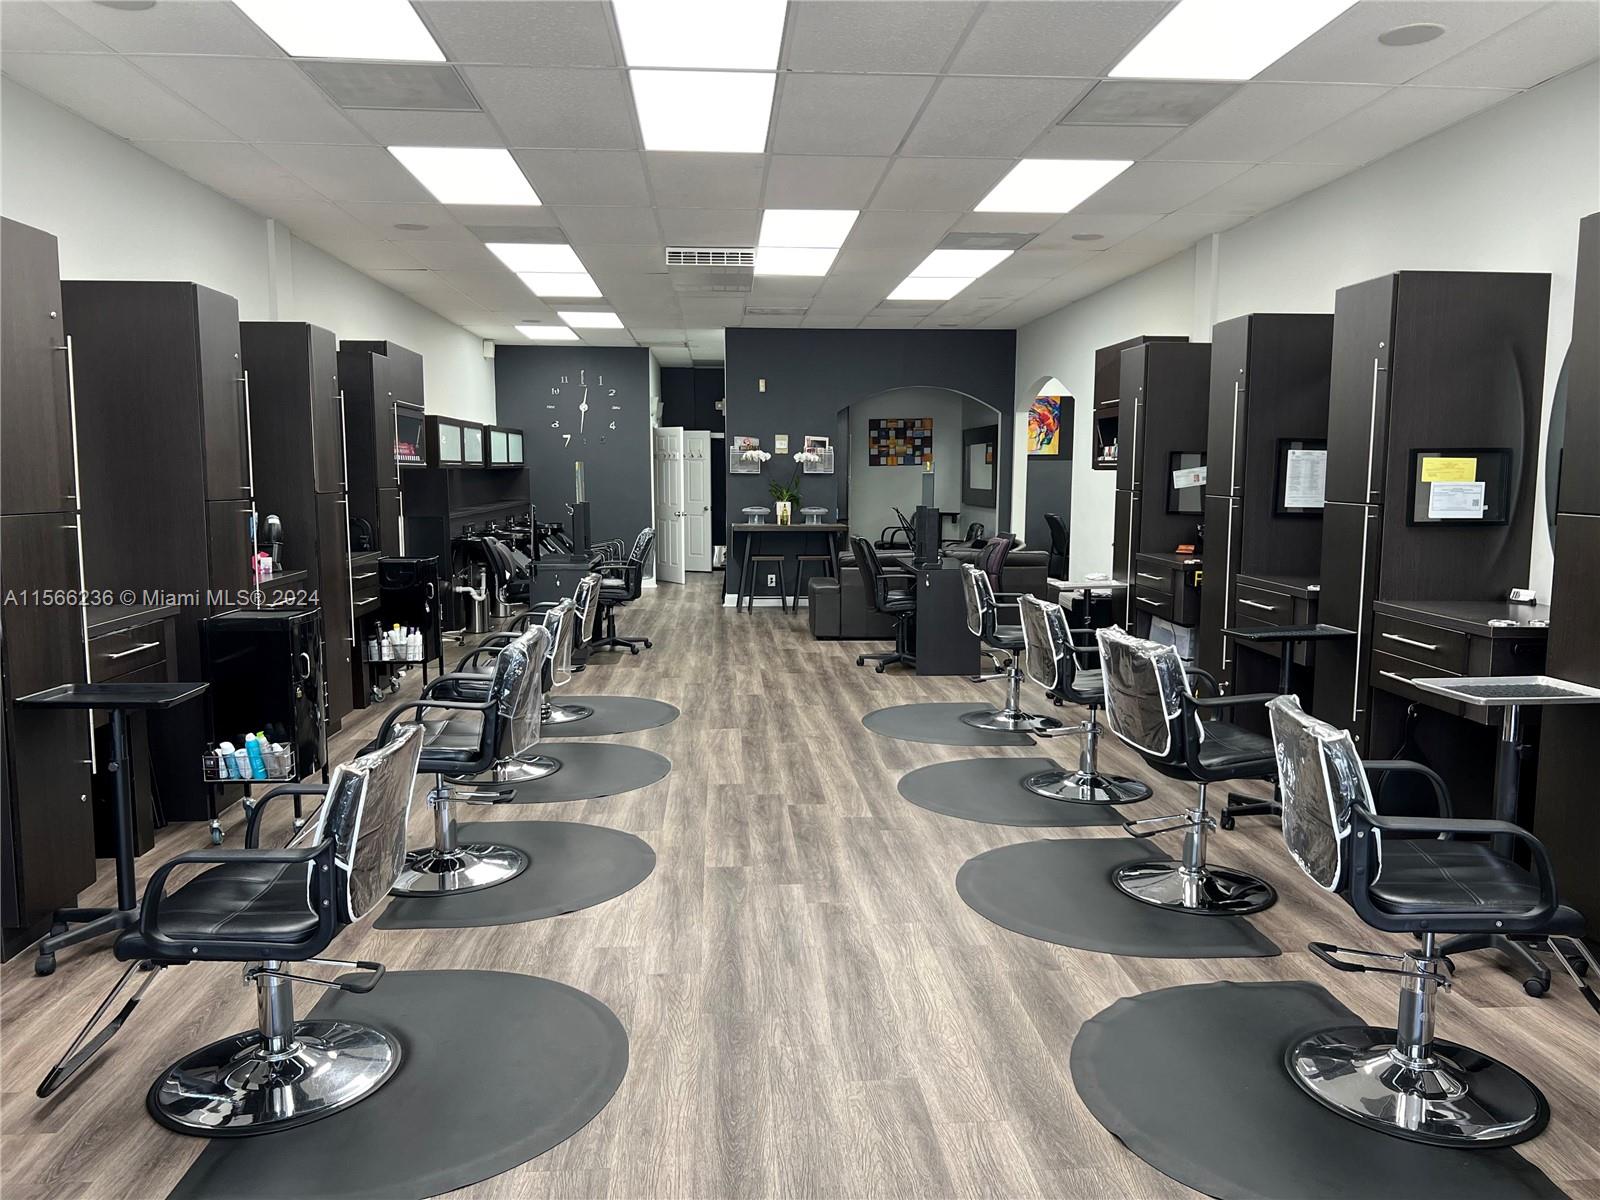   BEAUTY SALON & SPA FOR SALE IN PINECREST  For Sale A11566236, FL